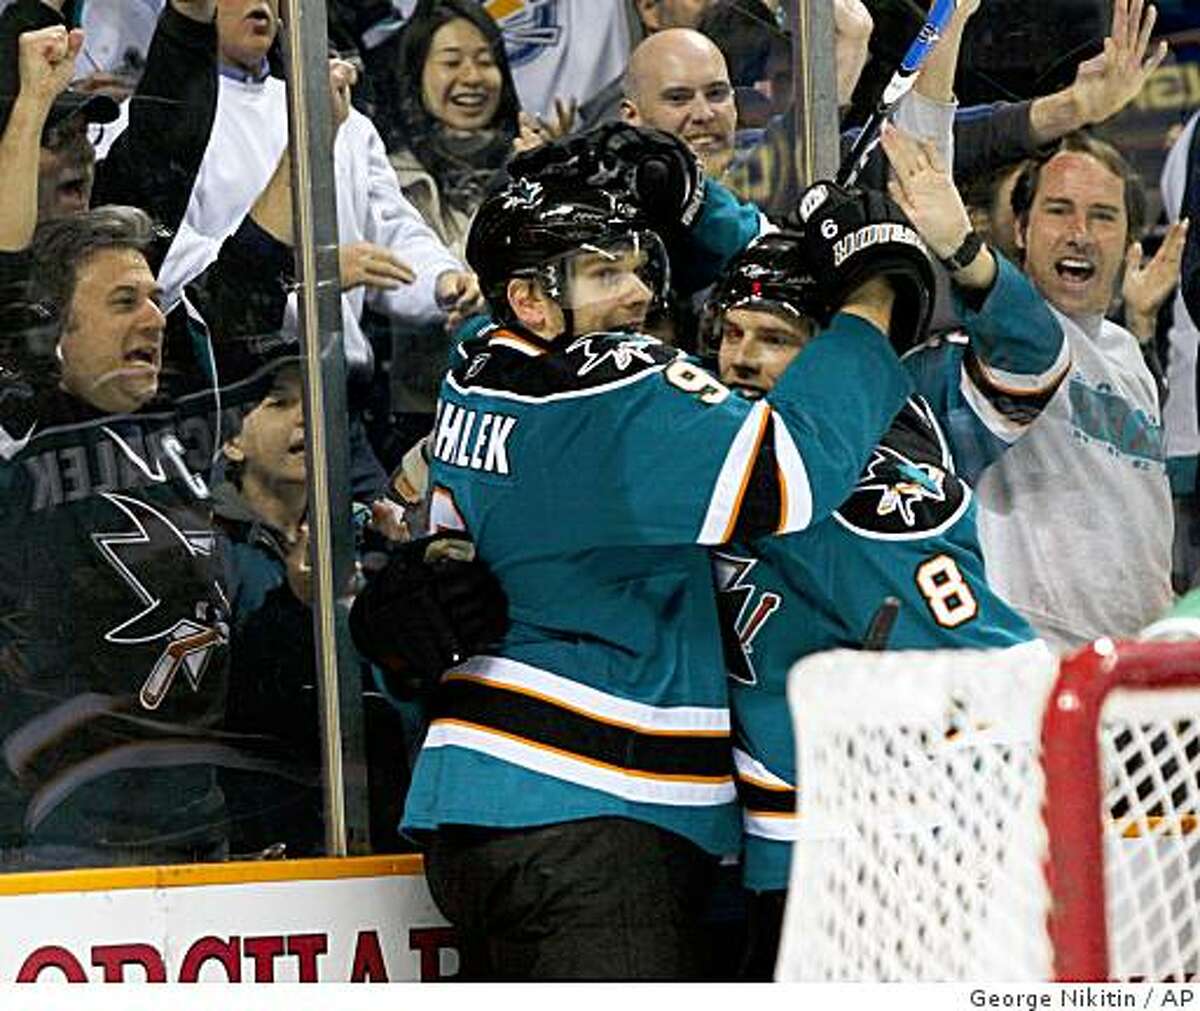 San Jose Sharks' Milan Michalek, left, celebrates with teammate Joe Pavelski after scoring a goal against the Colorado Avalanche during the second period of an NHL hockey game, Sunday, March 22, 2009 in San Jose, Calif. (AP Photo/George Nikitin)